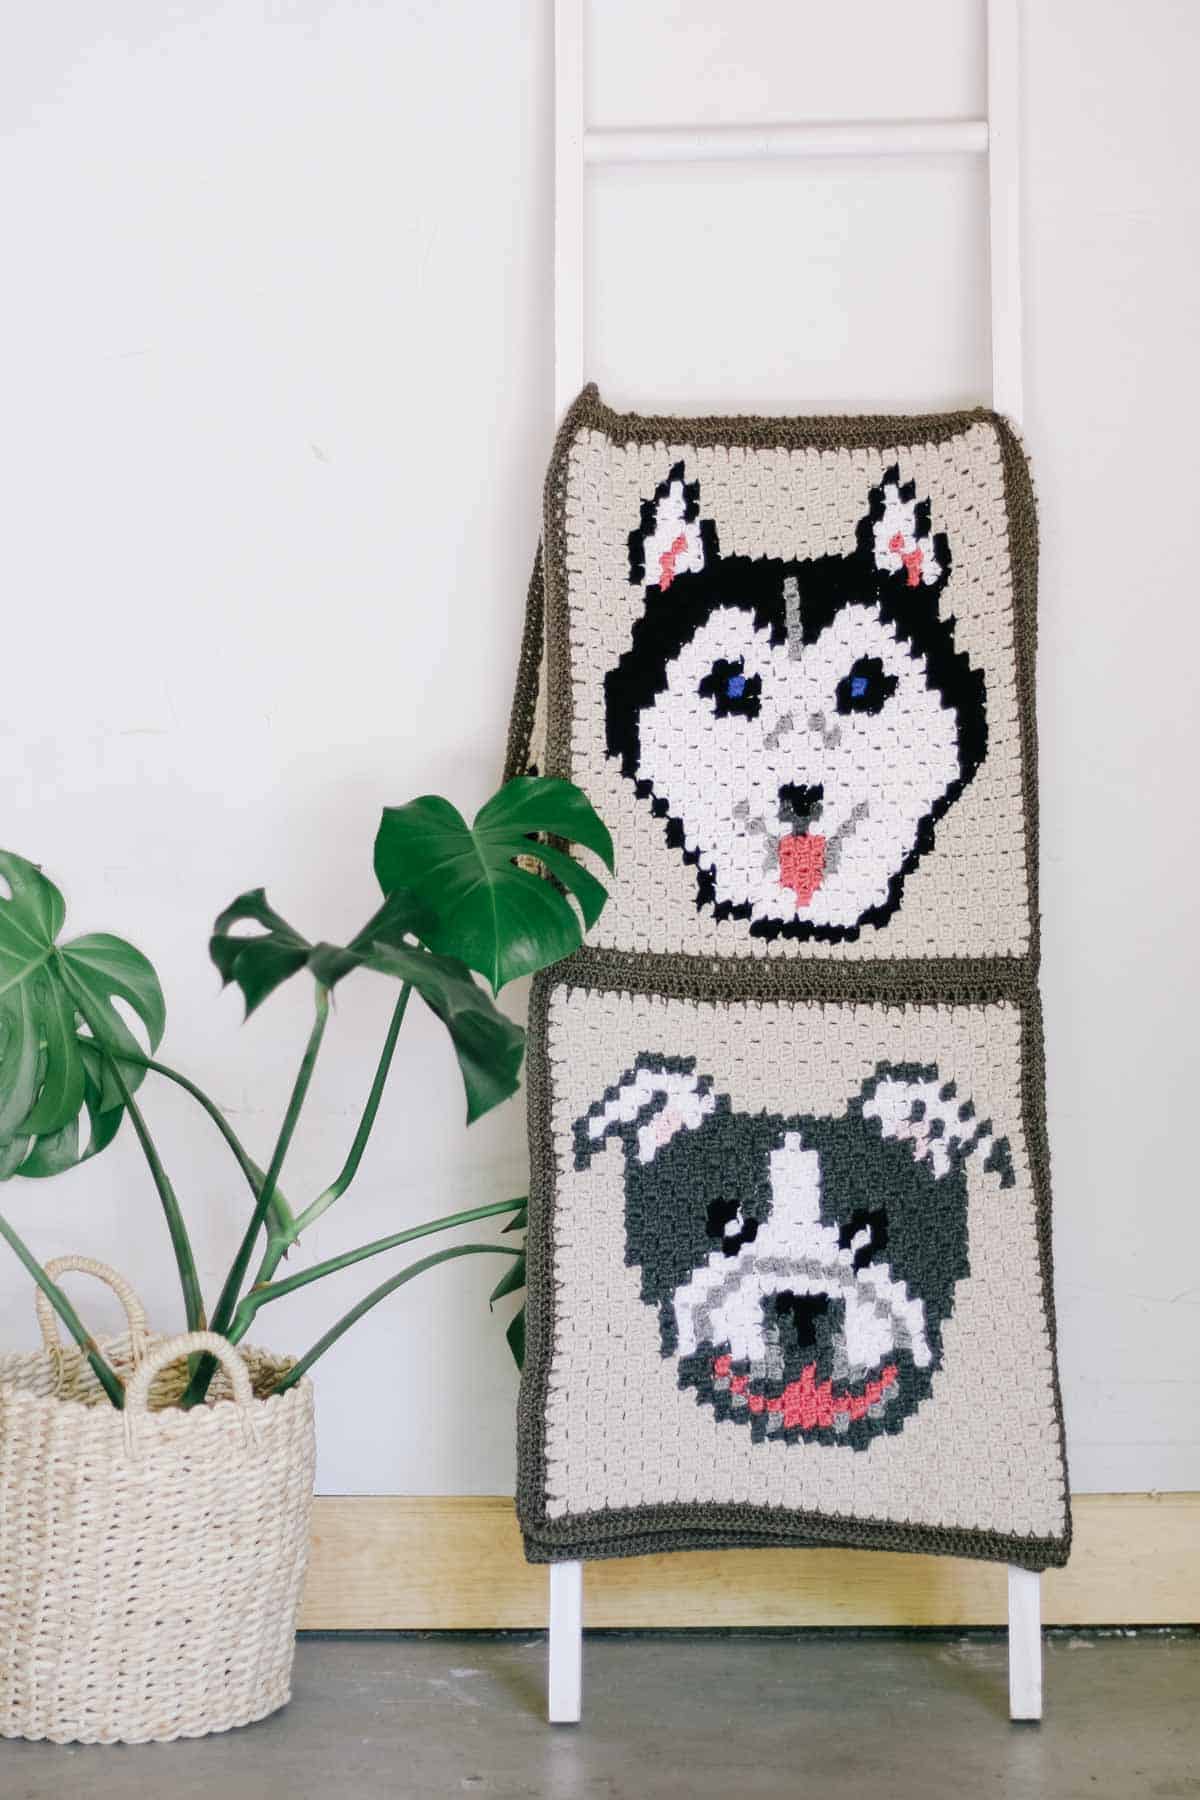 This image shows a dog-themed crochet blanket featuring a husky and bulldog. The blanket is folder onto a blanket ladder and is in front of a white wall.